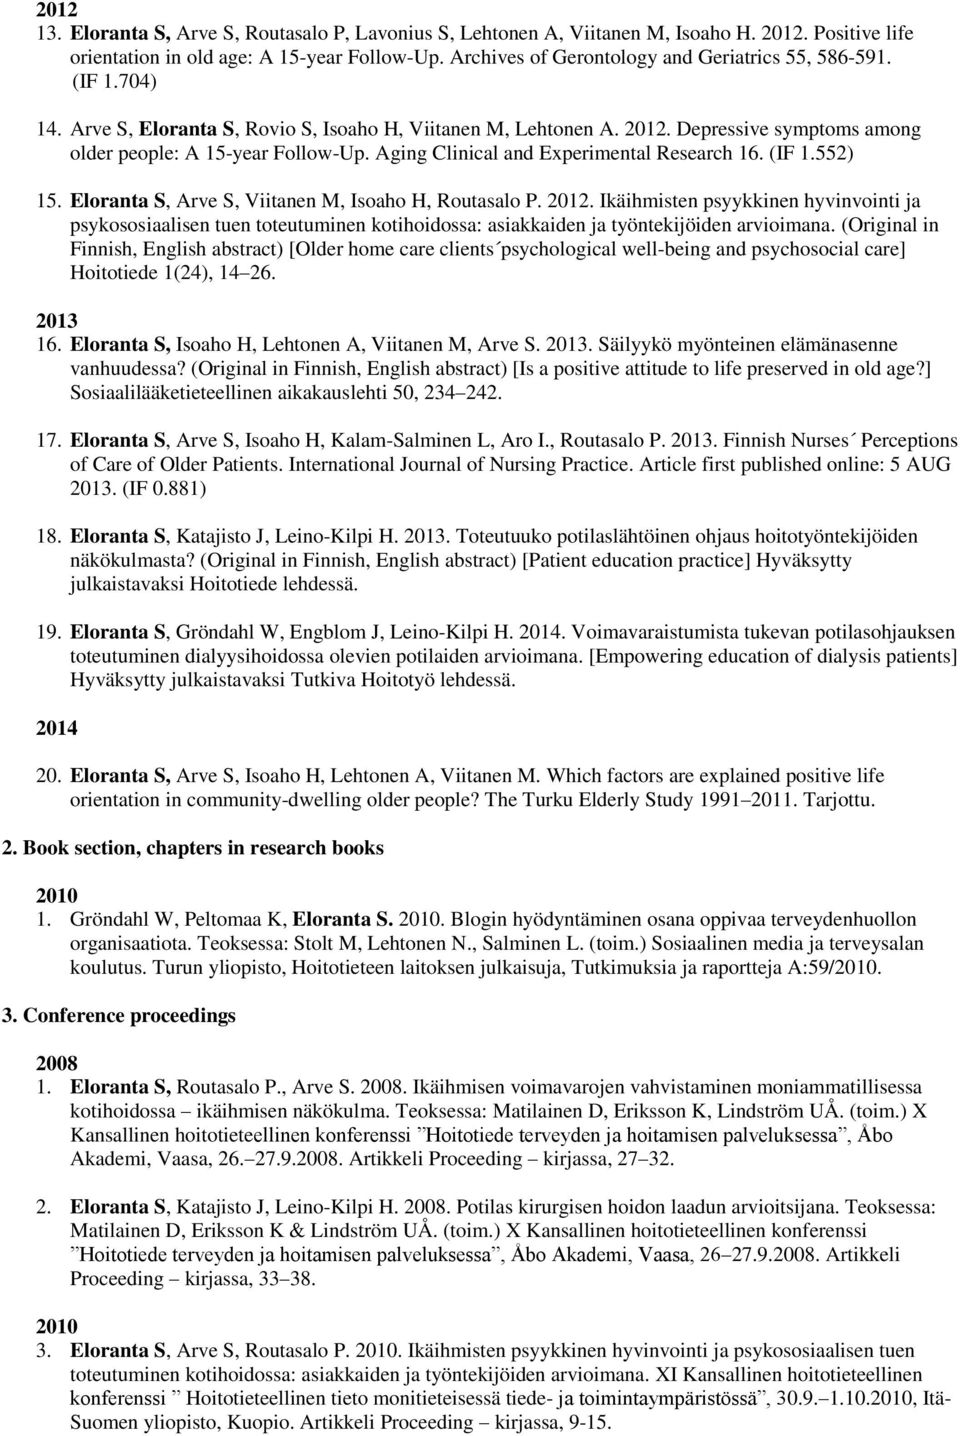 Aging Clinical and Experimental Research 16. (IF 1.552) 15. Eloranta S, Arve S, Viitanen M, Isoaho H, Routasalo P. 2012.